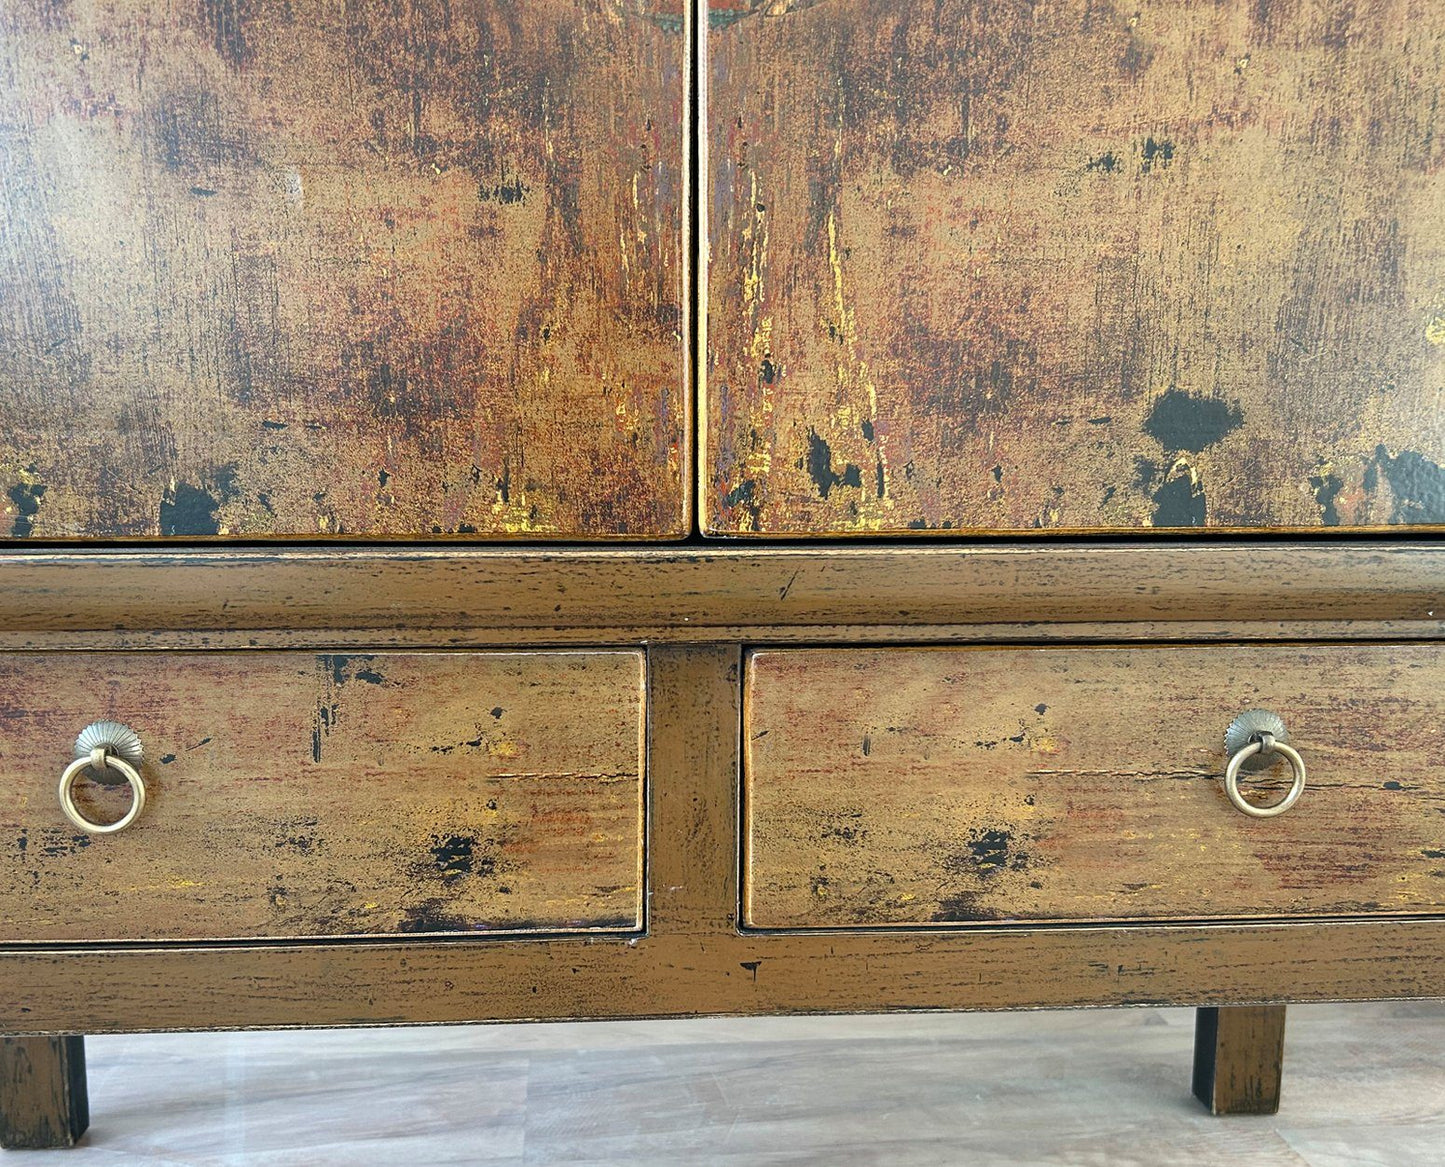 Chinese Cabinet Wedding Cabinet Brown - Art. A600-5